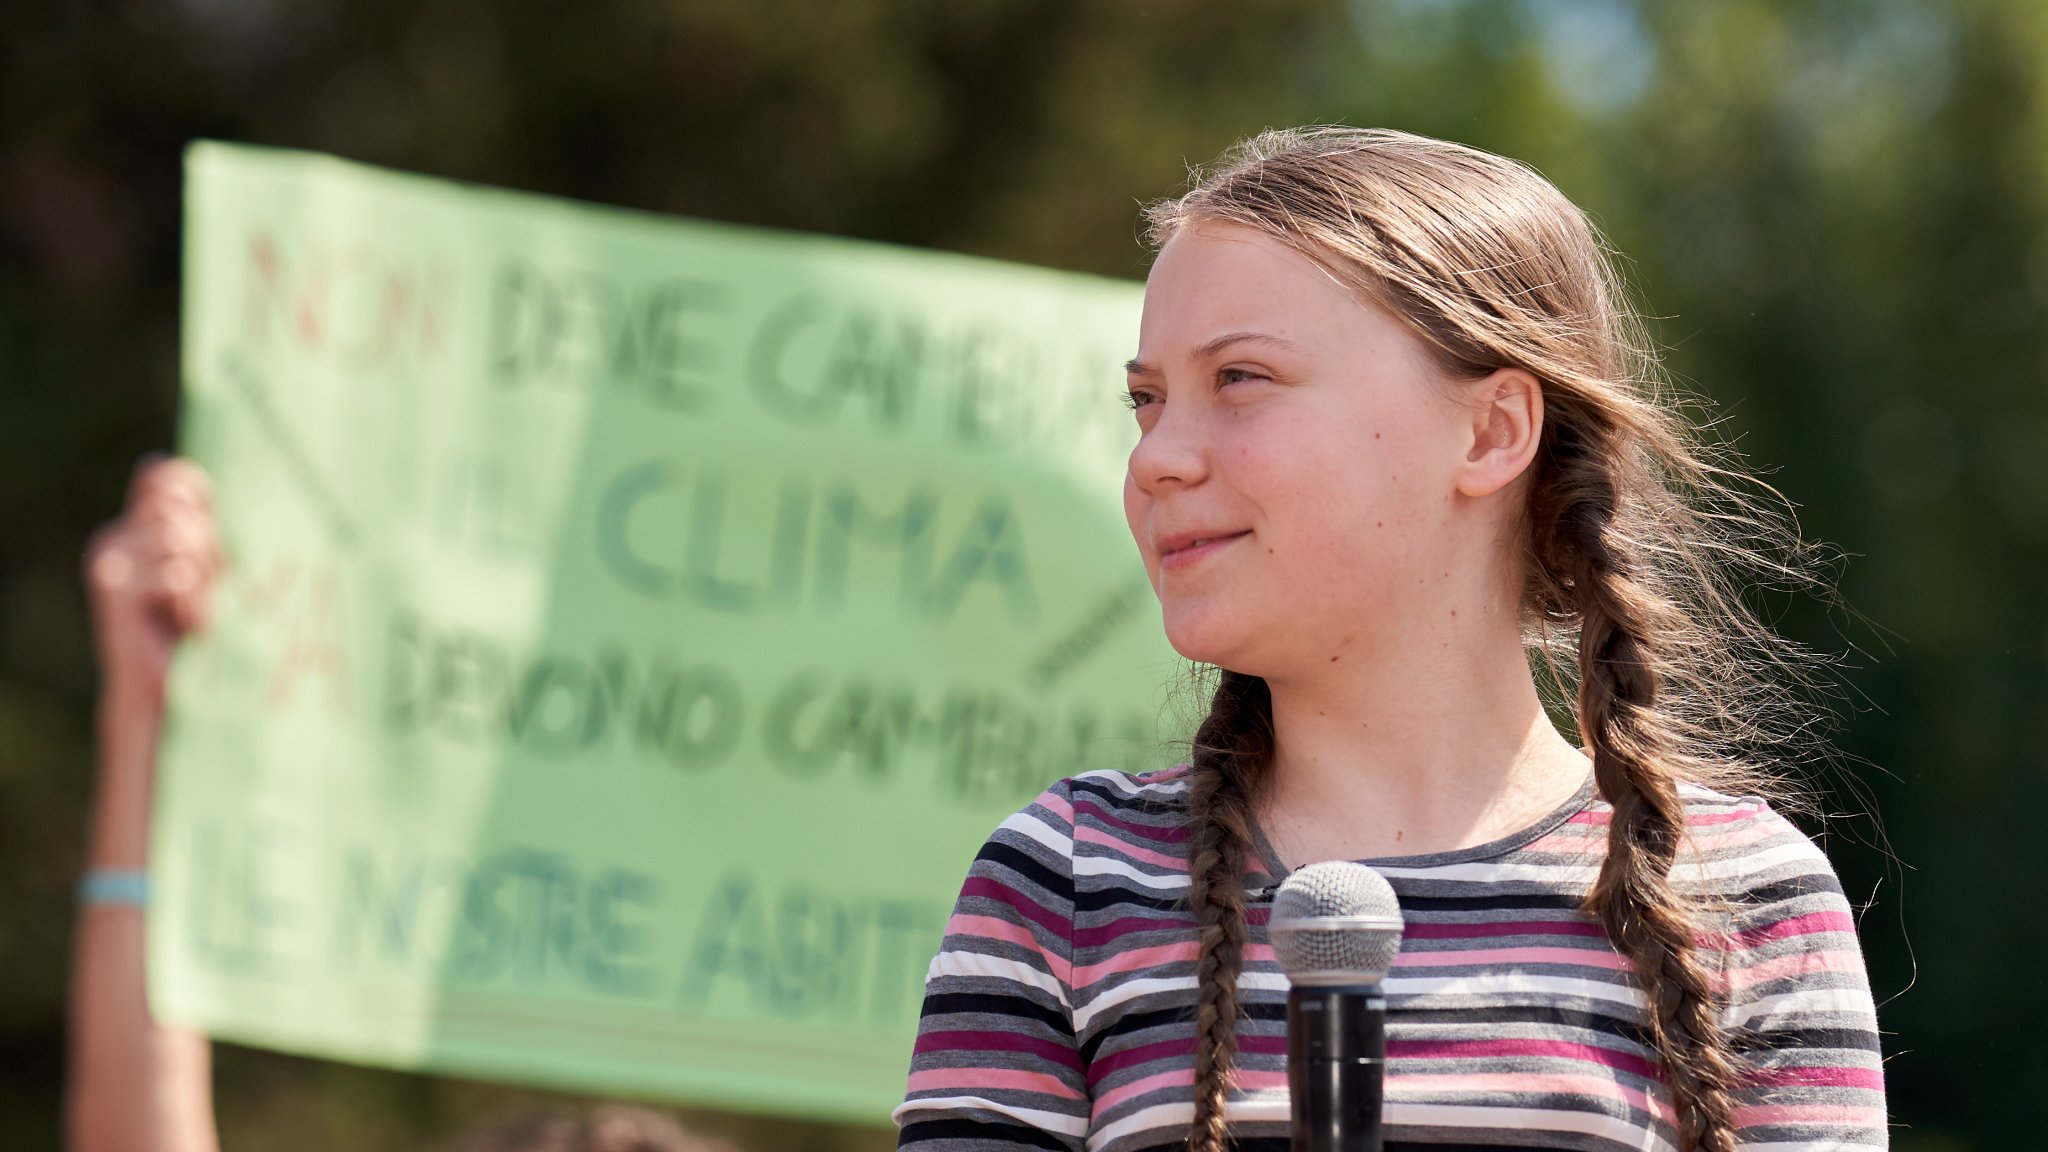 Swedish climate activist Greta Thunberg attending Fridays For Future (School Strike for Climate) protest in front of a huge crowd near the Colosseum